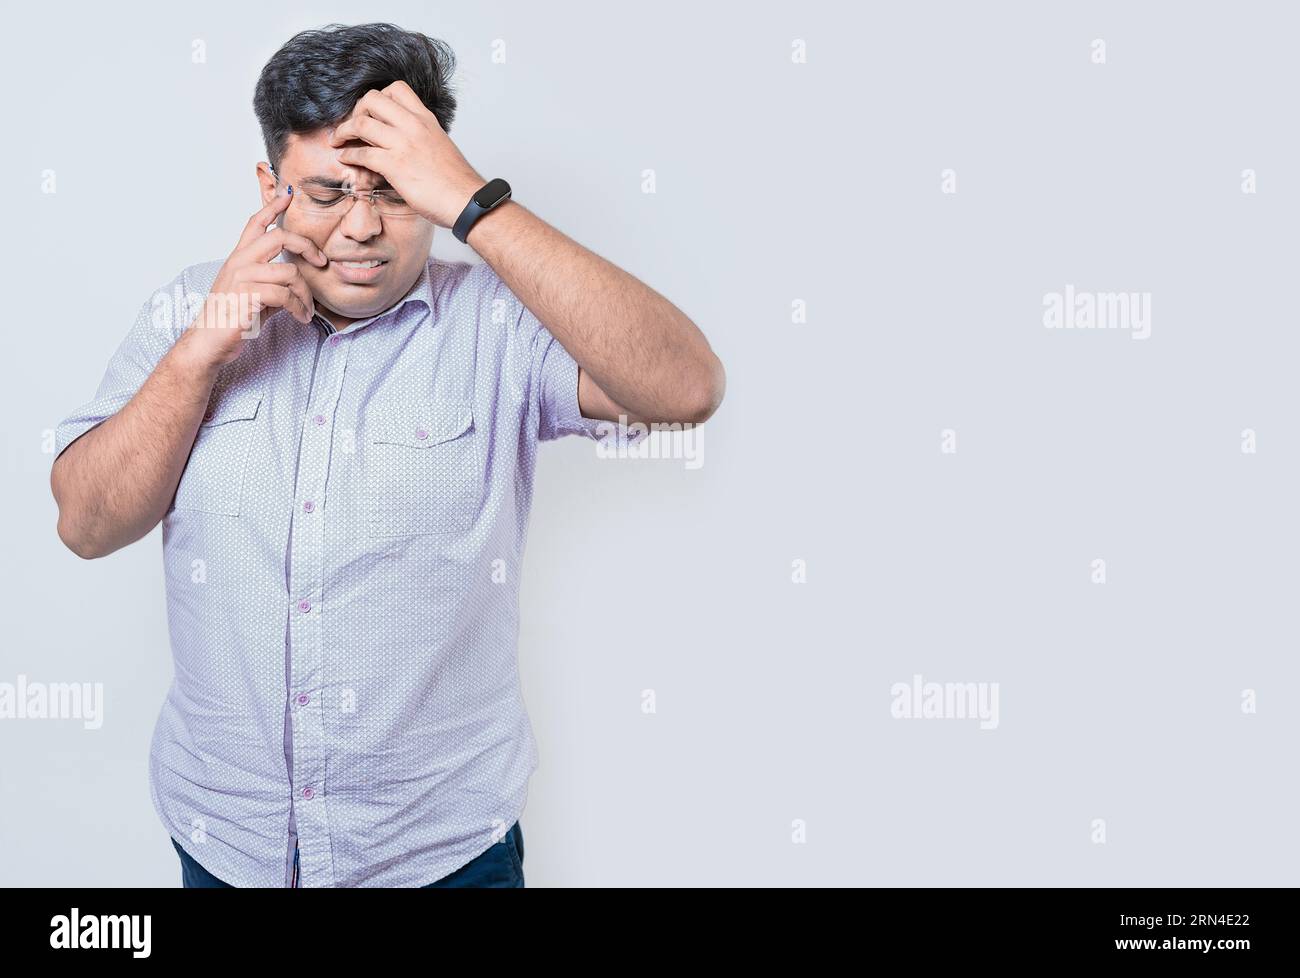 Exhausted person putting the palm of his hand on his face. Fatigued and exhausted man isolated. Concept of a bored and tired man Stock Photo